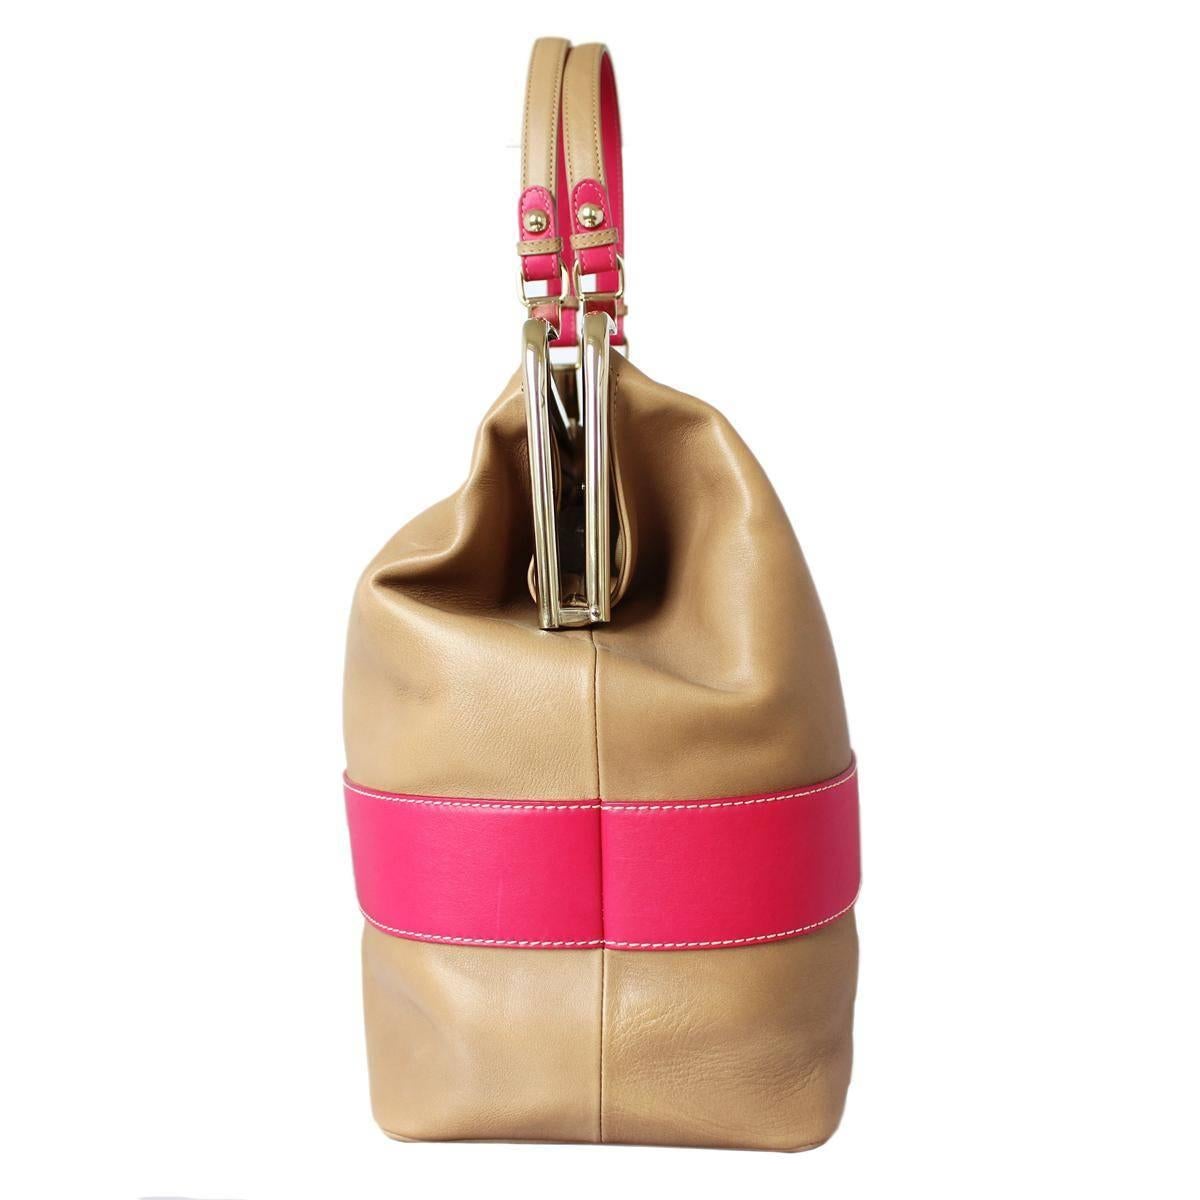 Very beautiful and classy Roberta di Camerino bag
Leather
Noisette color
Two handles
Fuchsia color
Metal
Tetile internal
Double internal pocket, one with zip
Cm 42 x 32 x 18 (16.5 x 12.5 x 7)
Made in Italy
Worldwide express shipping included in the